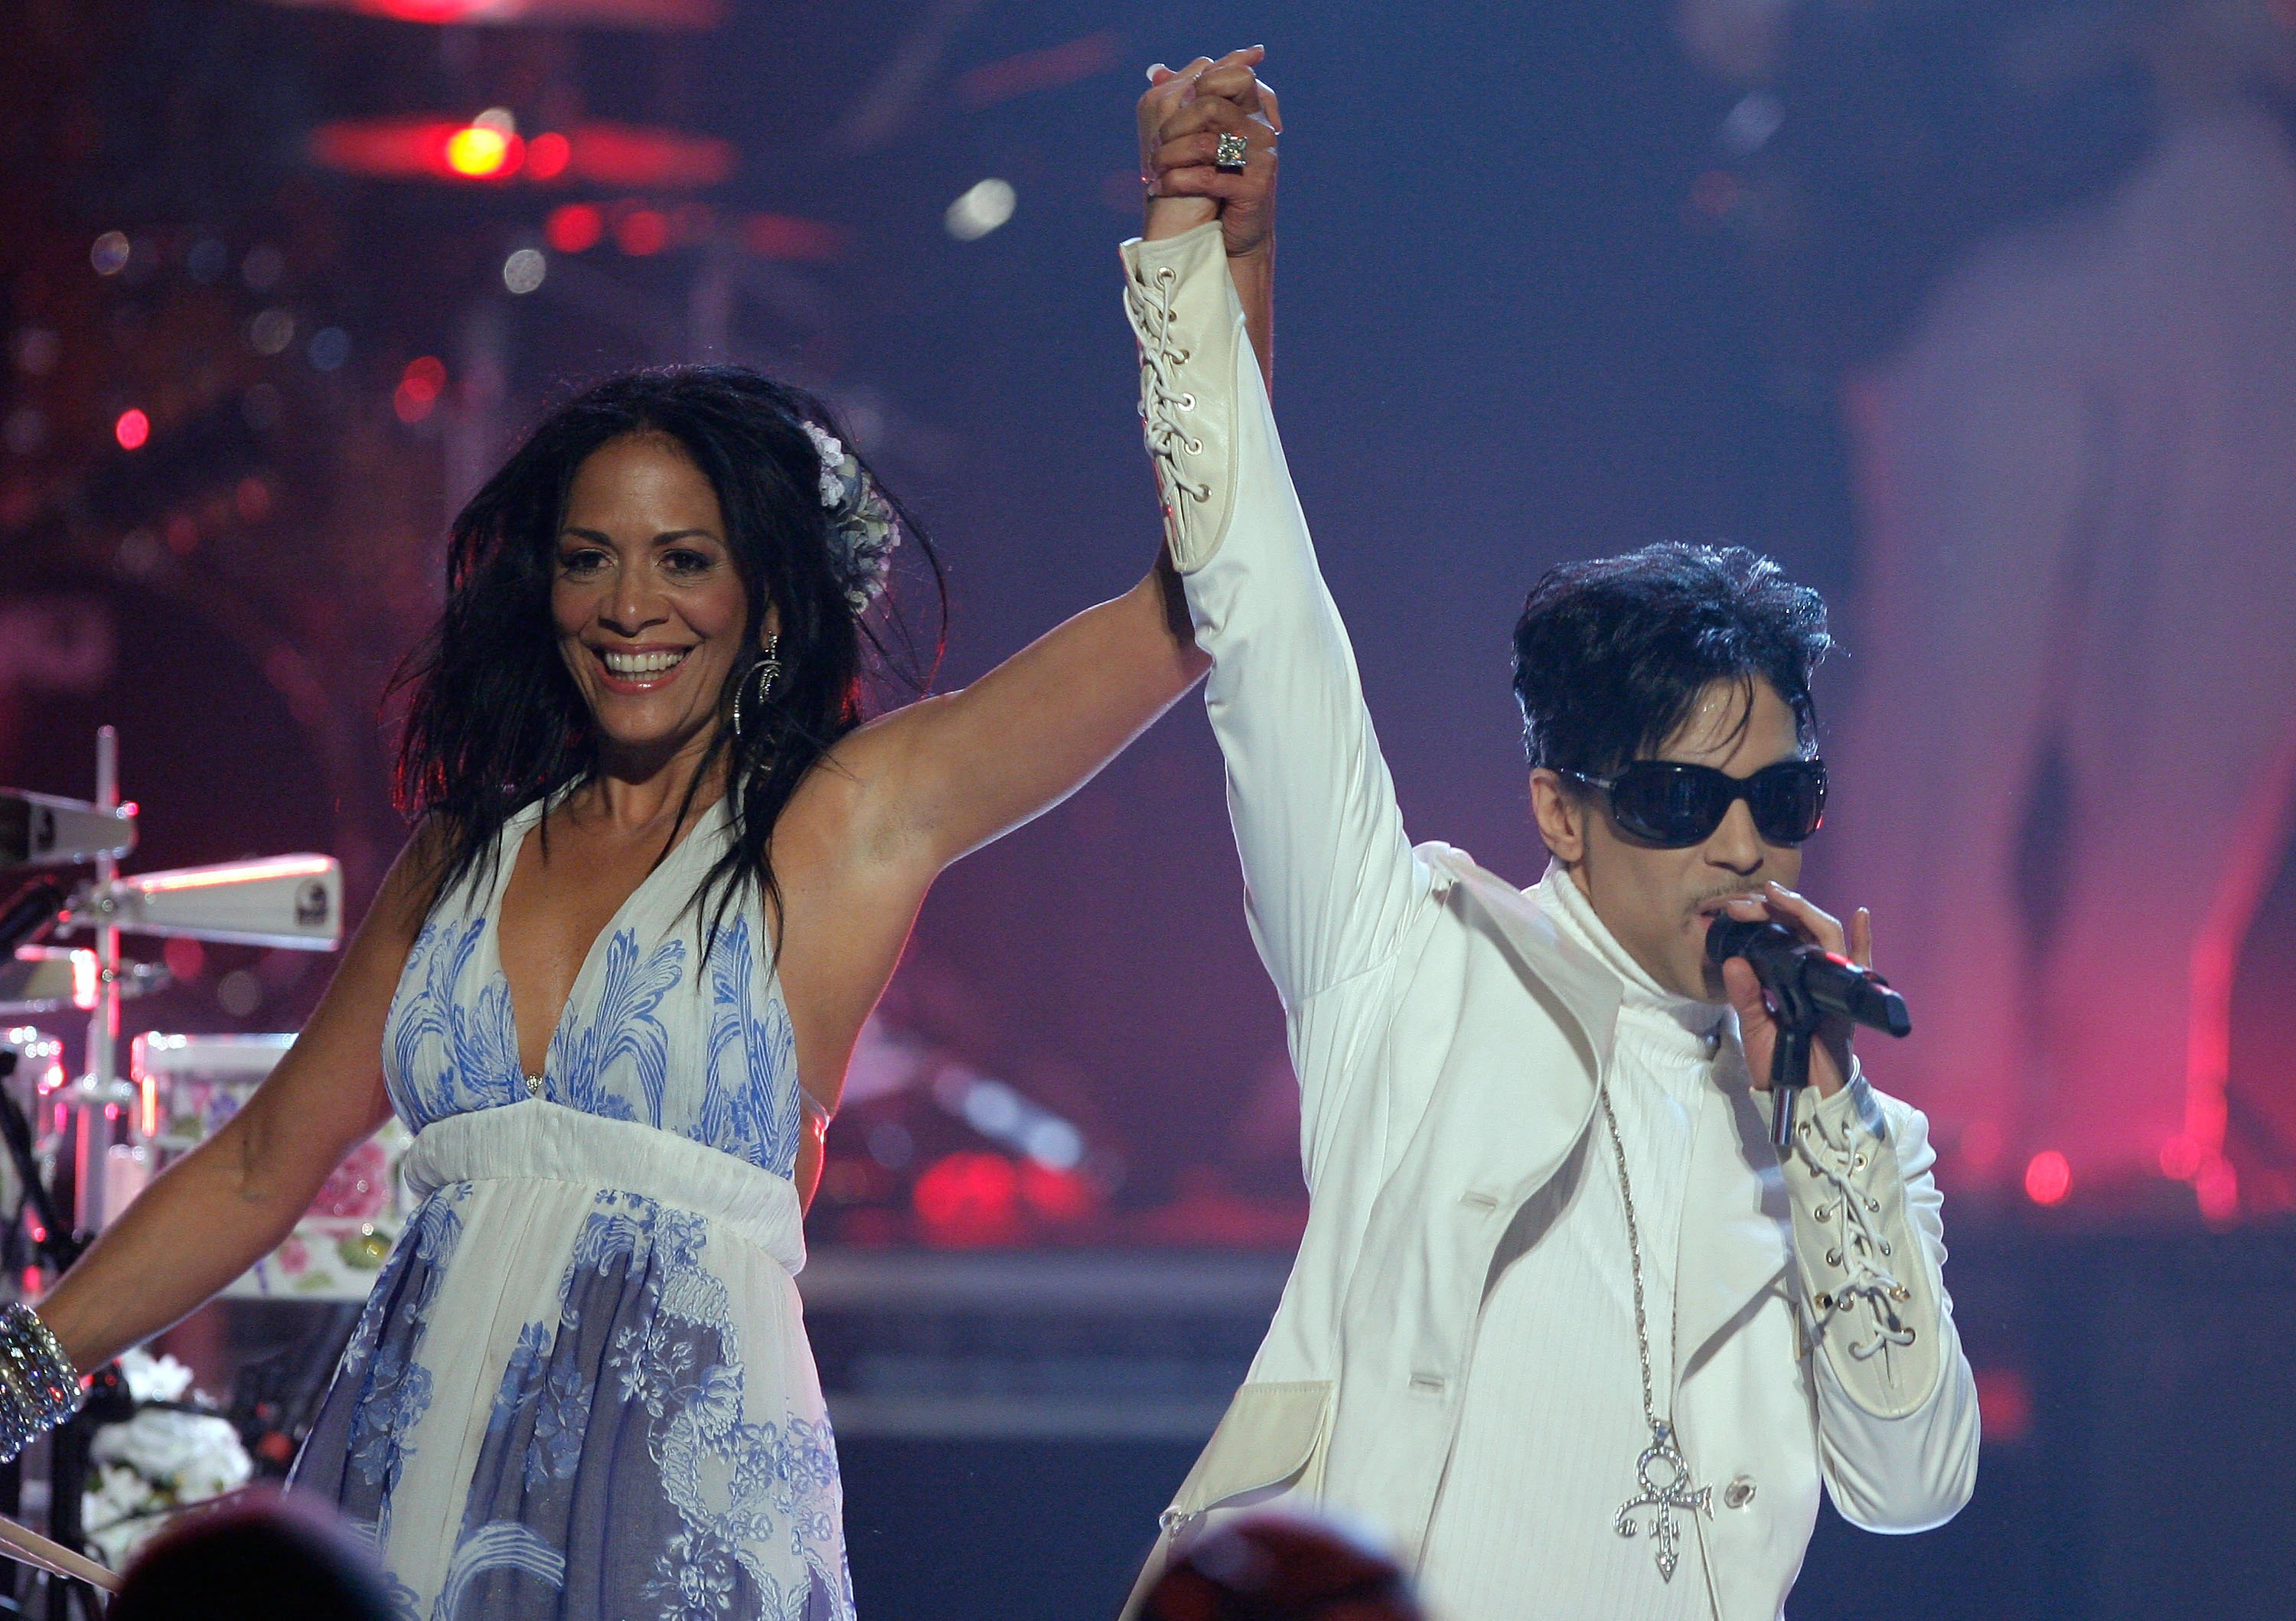 Sheila E. & Prince's Relationship Makes Her The Perfect Performer For